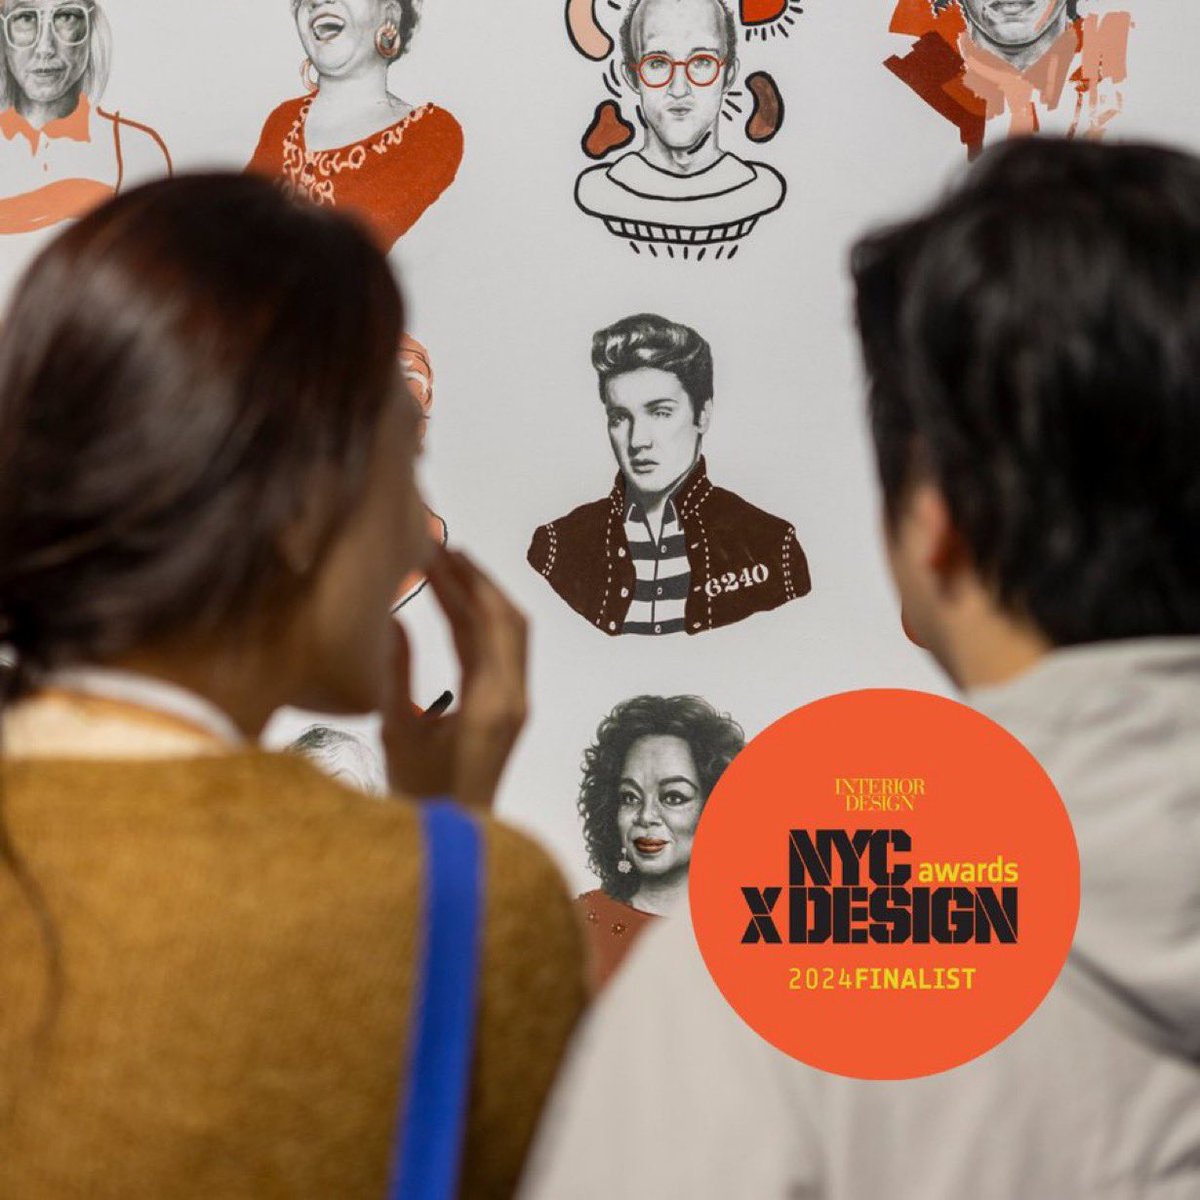 Iconographic by Astek x @terrycrews is recognized as a finalist in the #NYCxDesignawards by Interior Design magazine! 👀👉🏿 booth at @ICFF to check out the collaboration before the show ends tomorrow @AstekInc